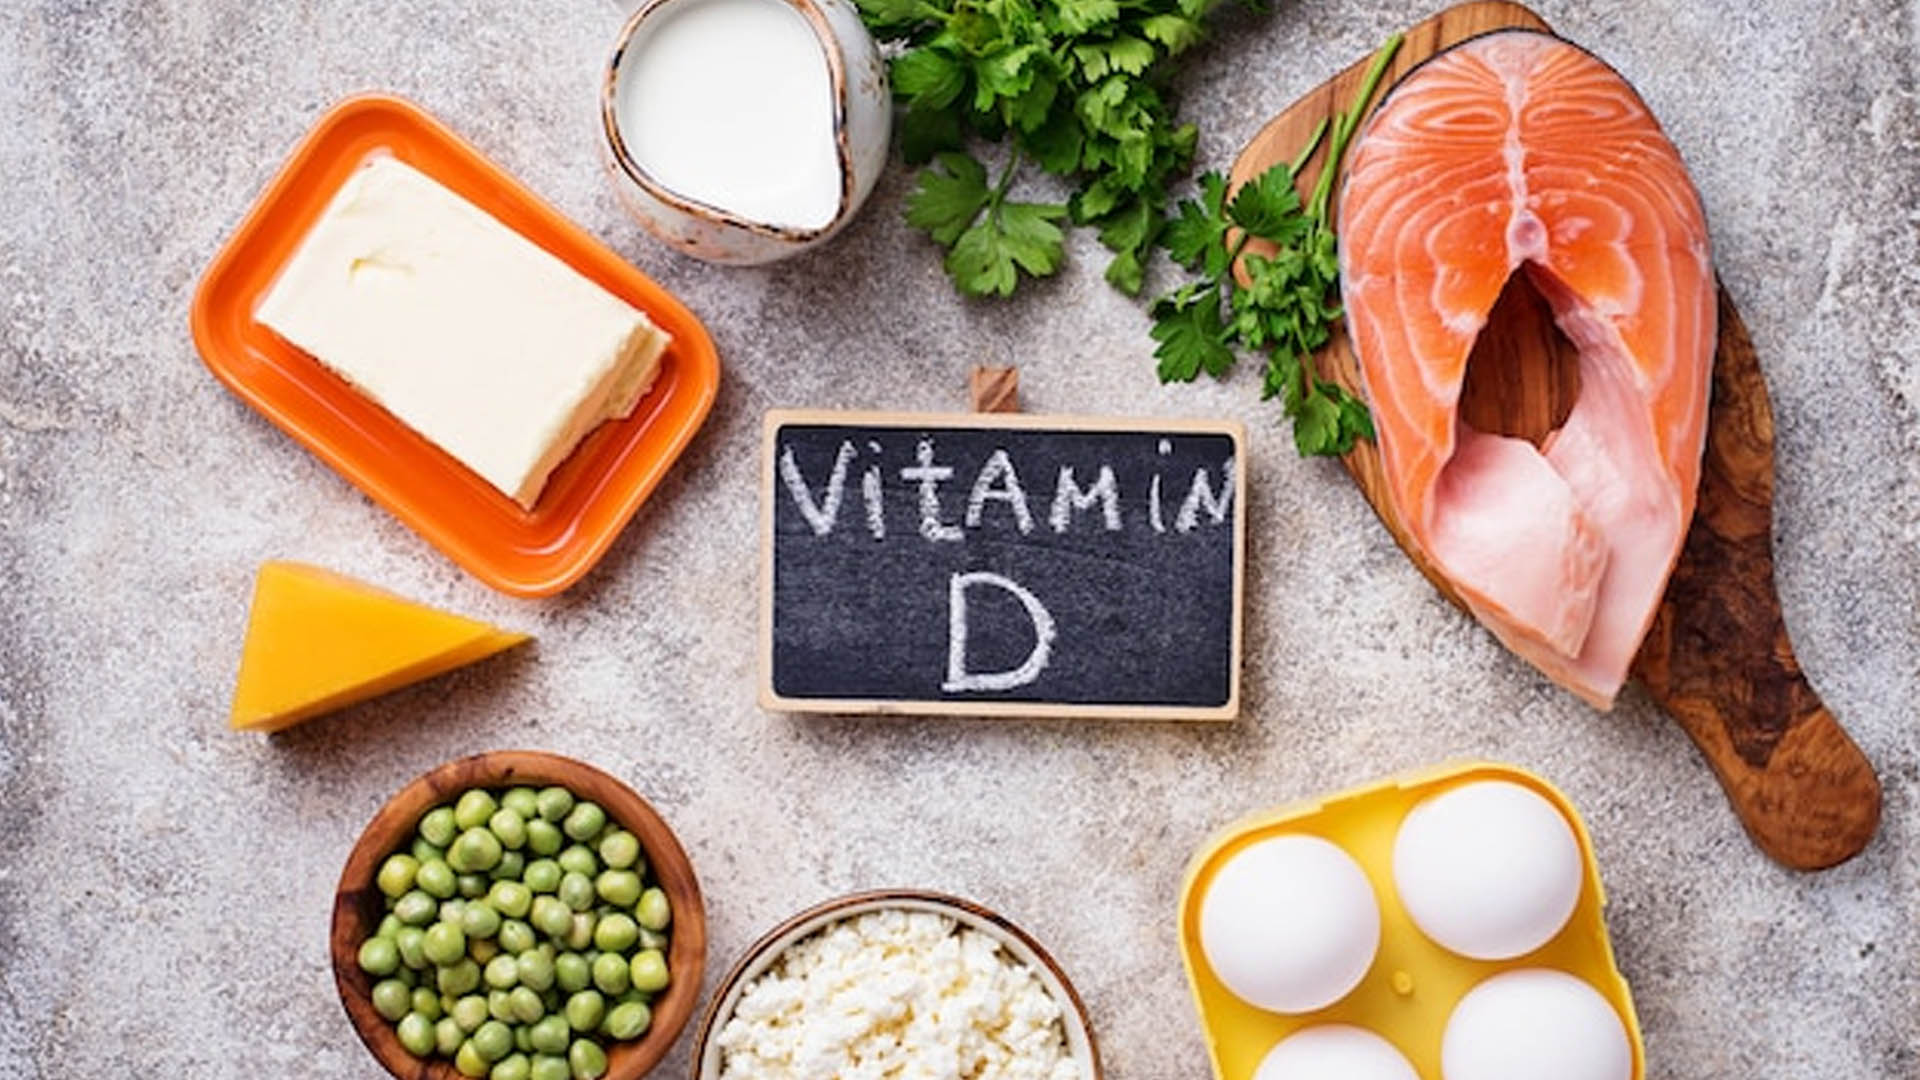 Vitamin D: Types, Benefits, Deficiency and Food Sources